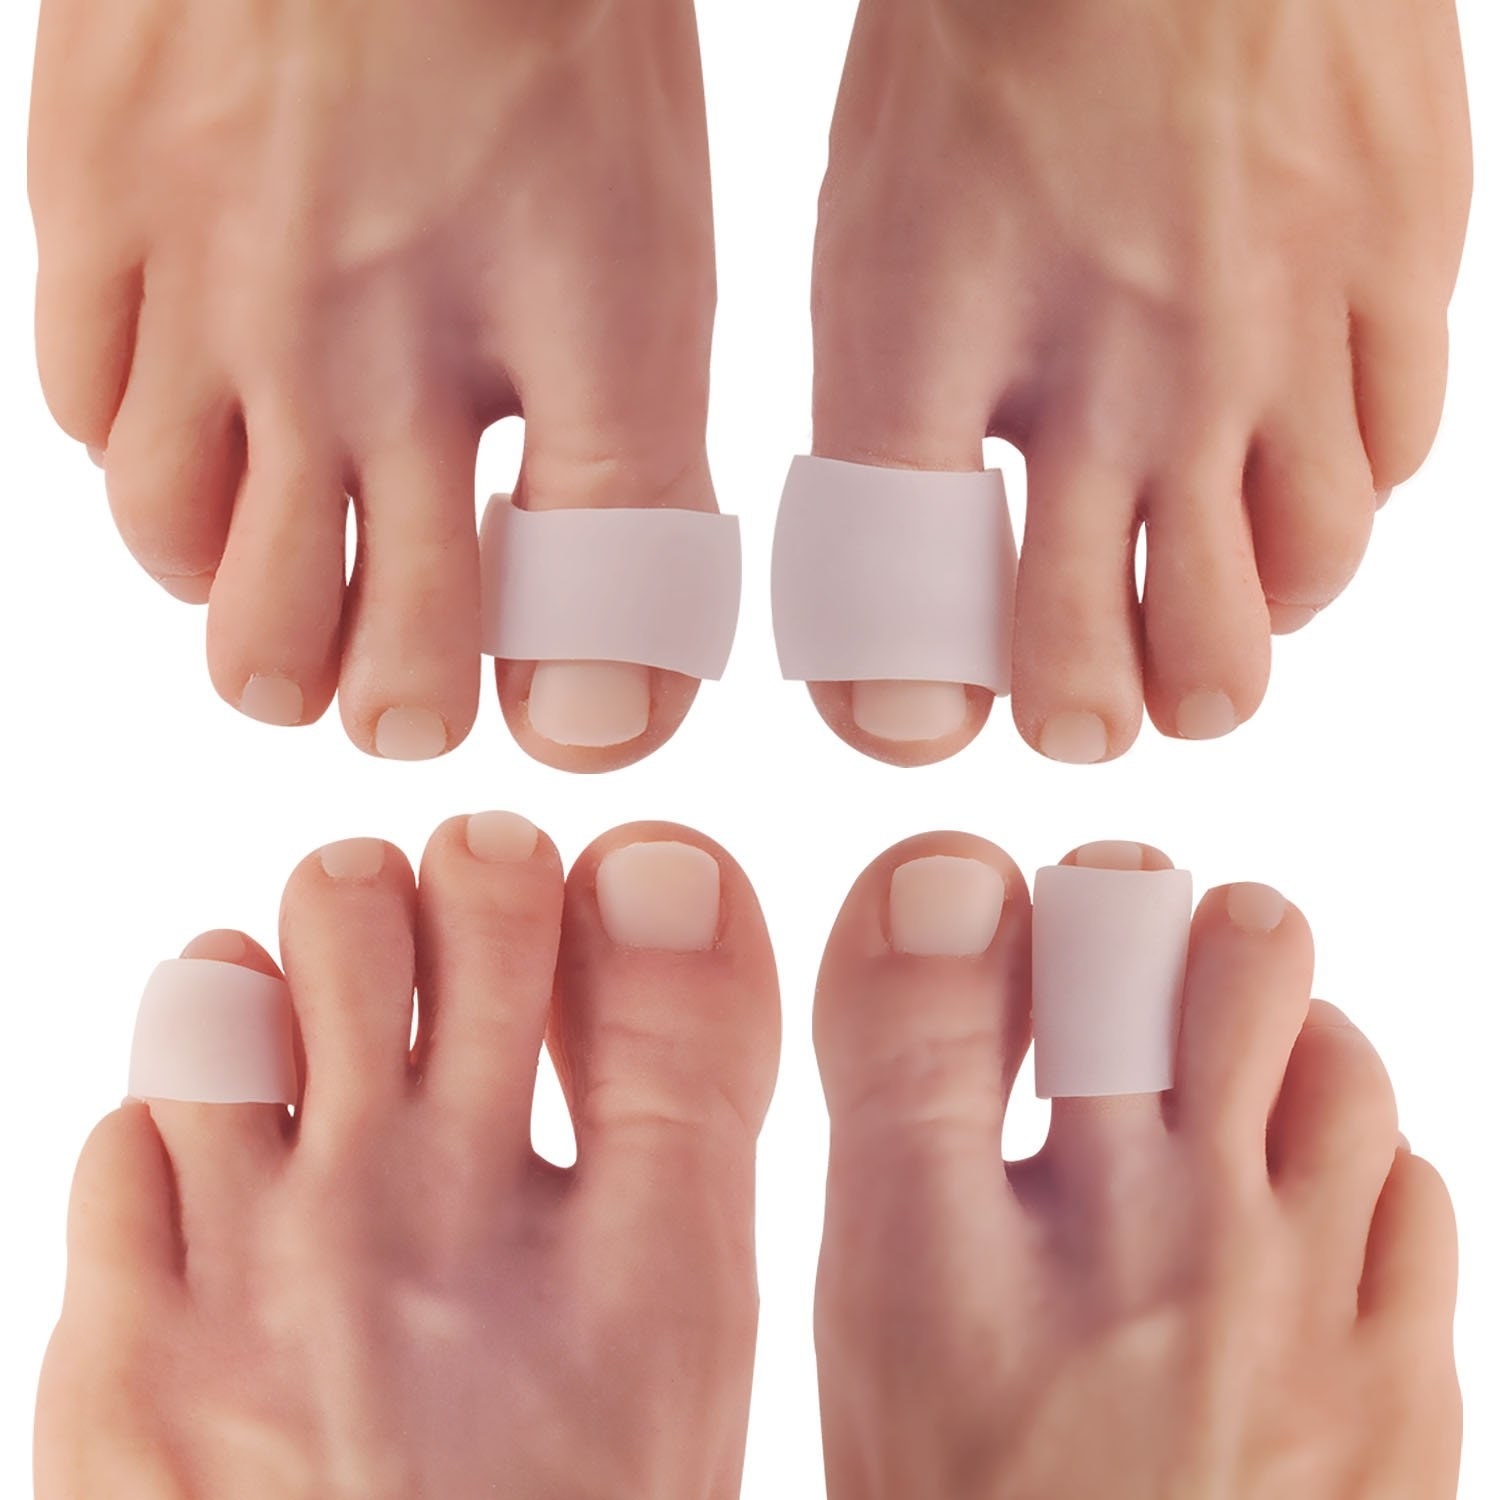 two sets of feet wearing the toe protectors on various toes